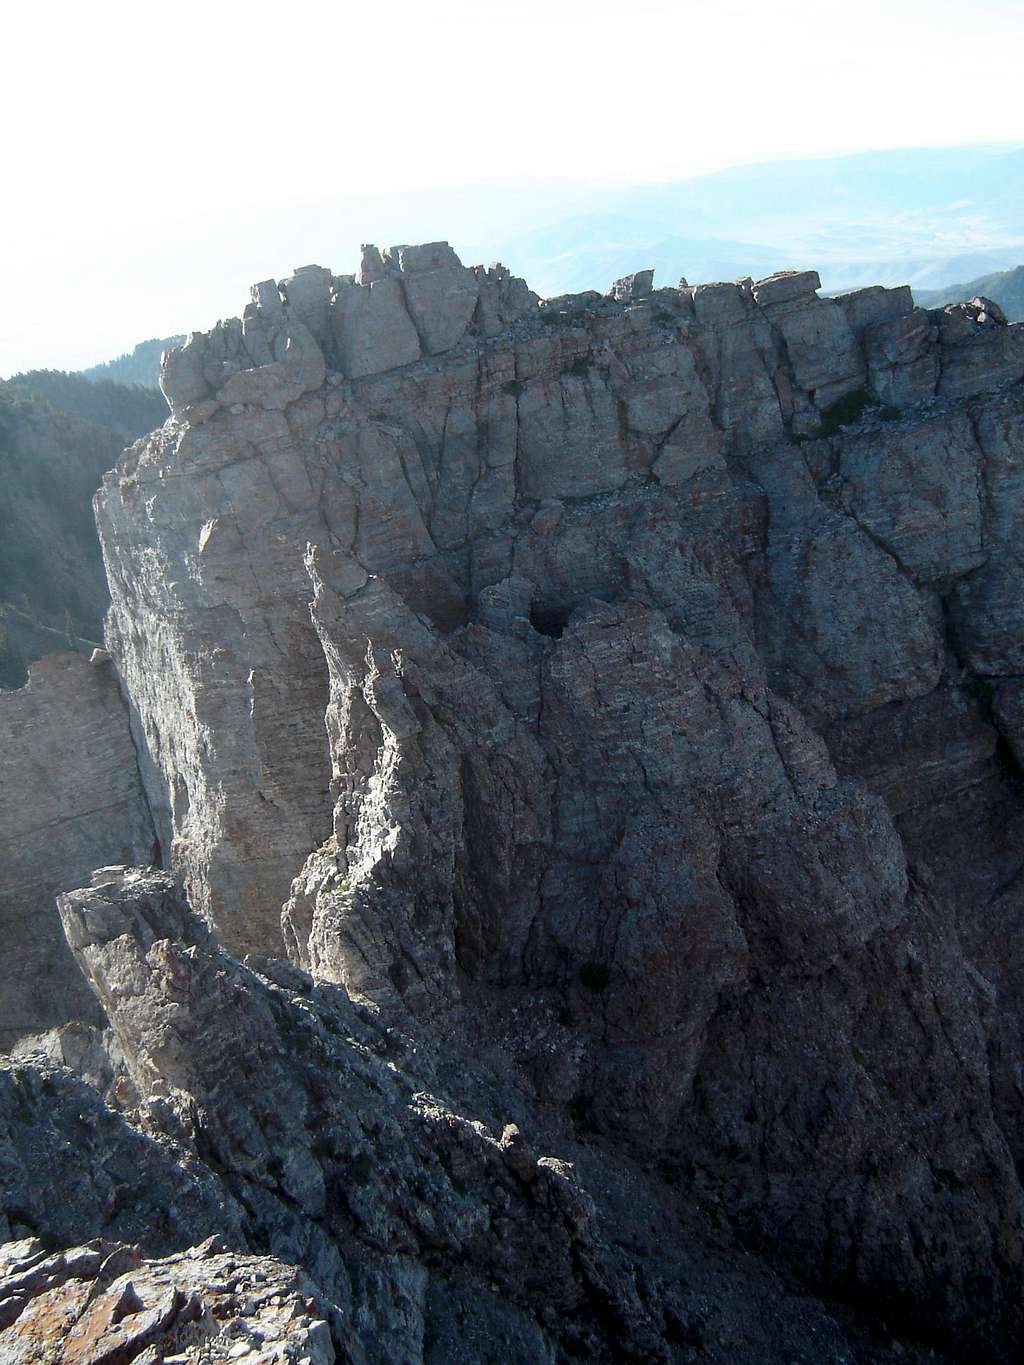 View of the first summit